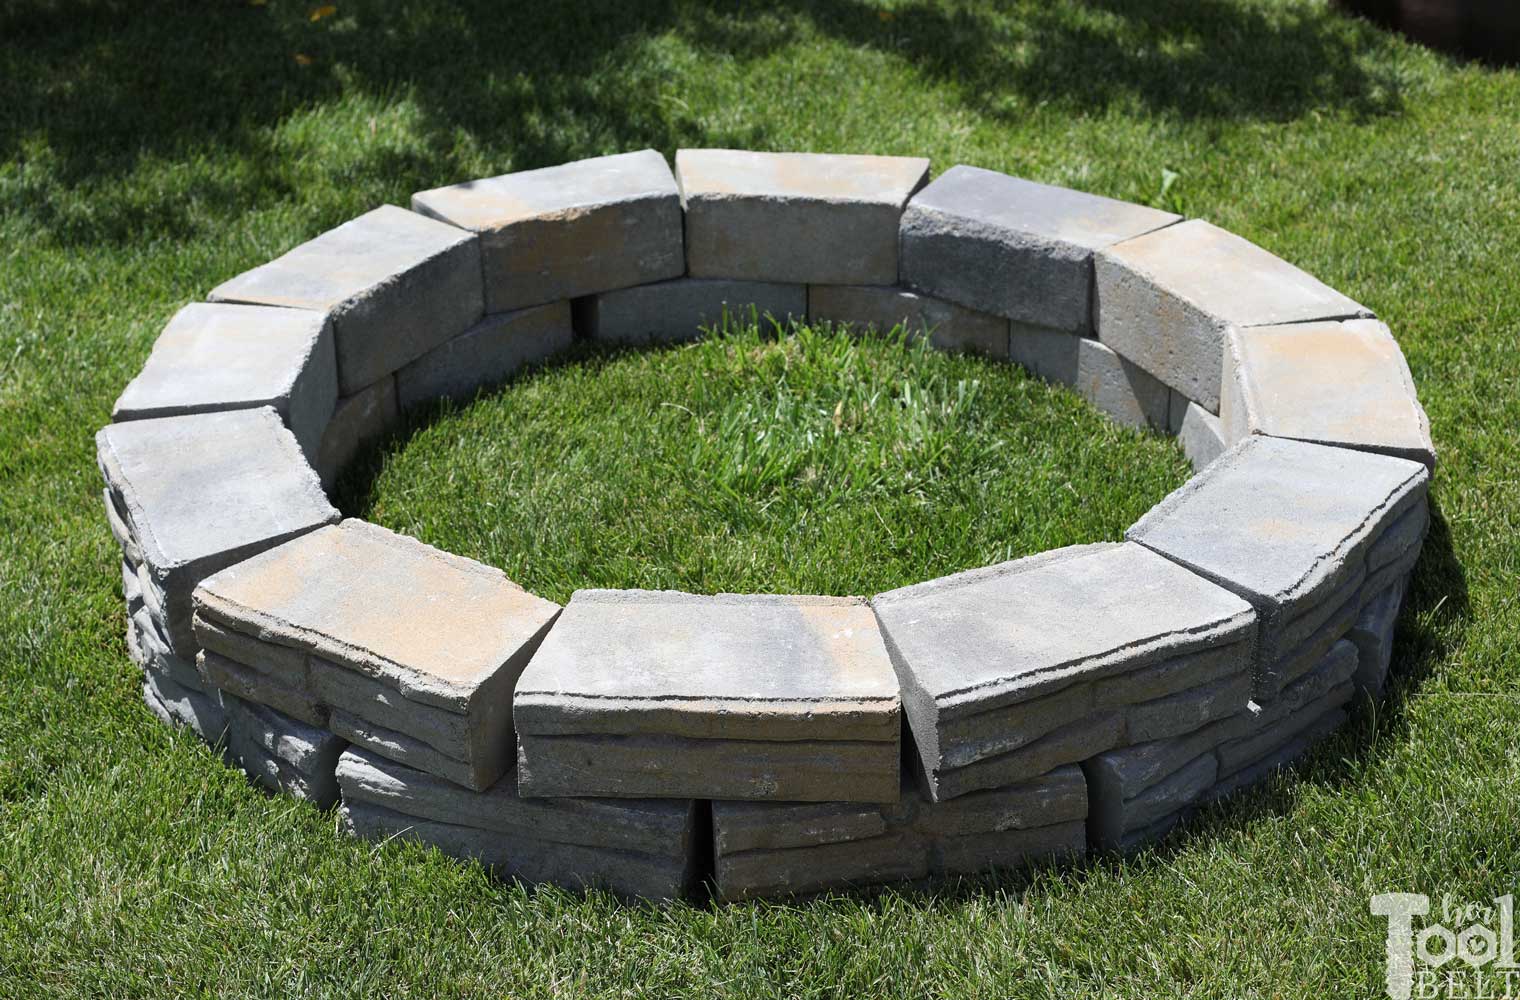 Diy Backyard Fire Pit Her Tool Belt, How Many Wall Blocks To Make A Fire Pit